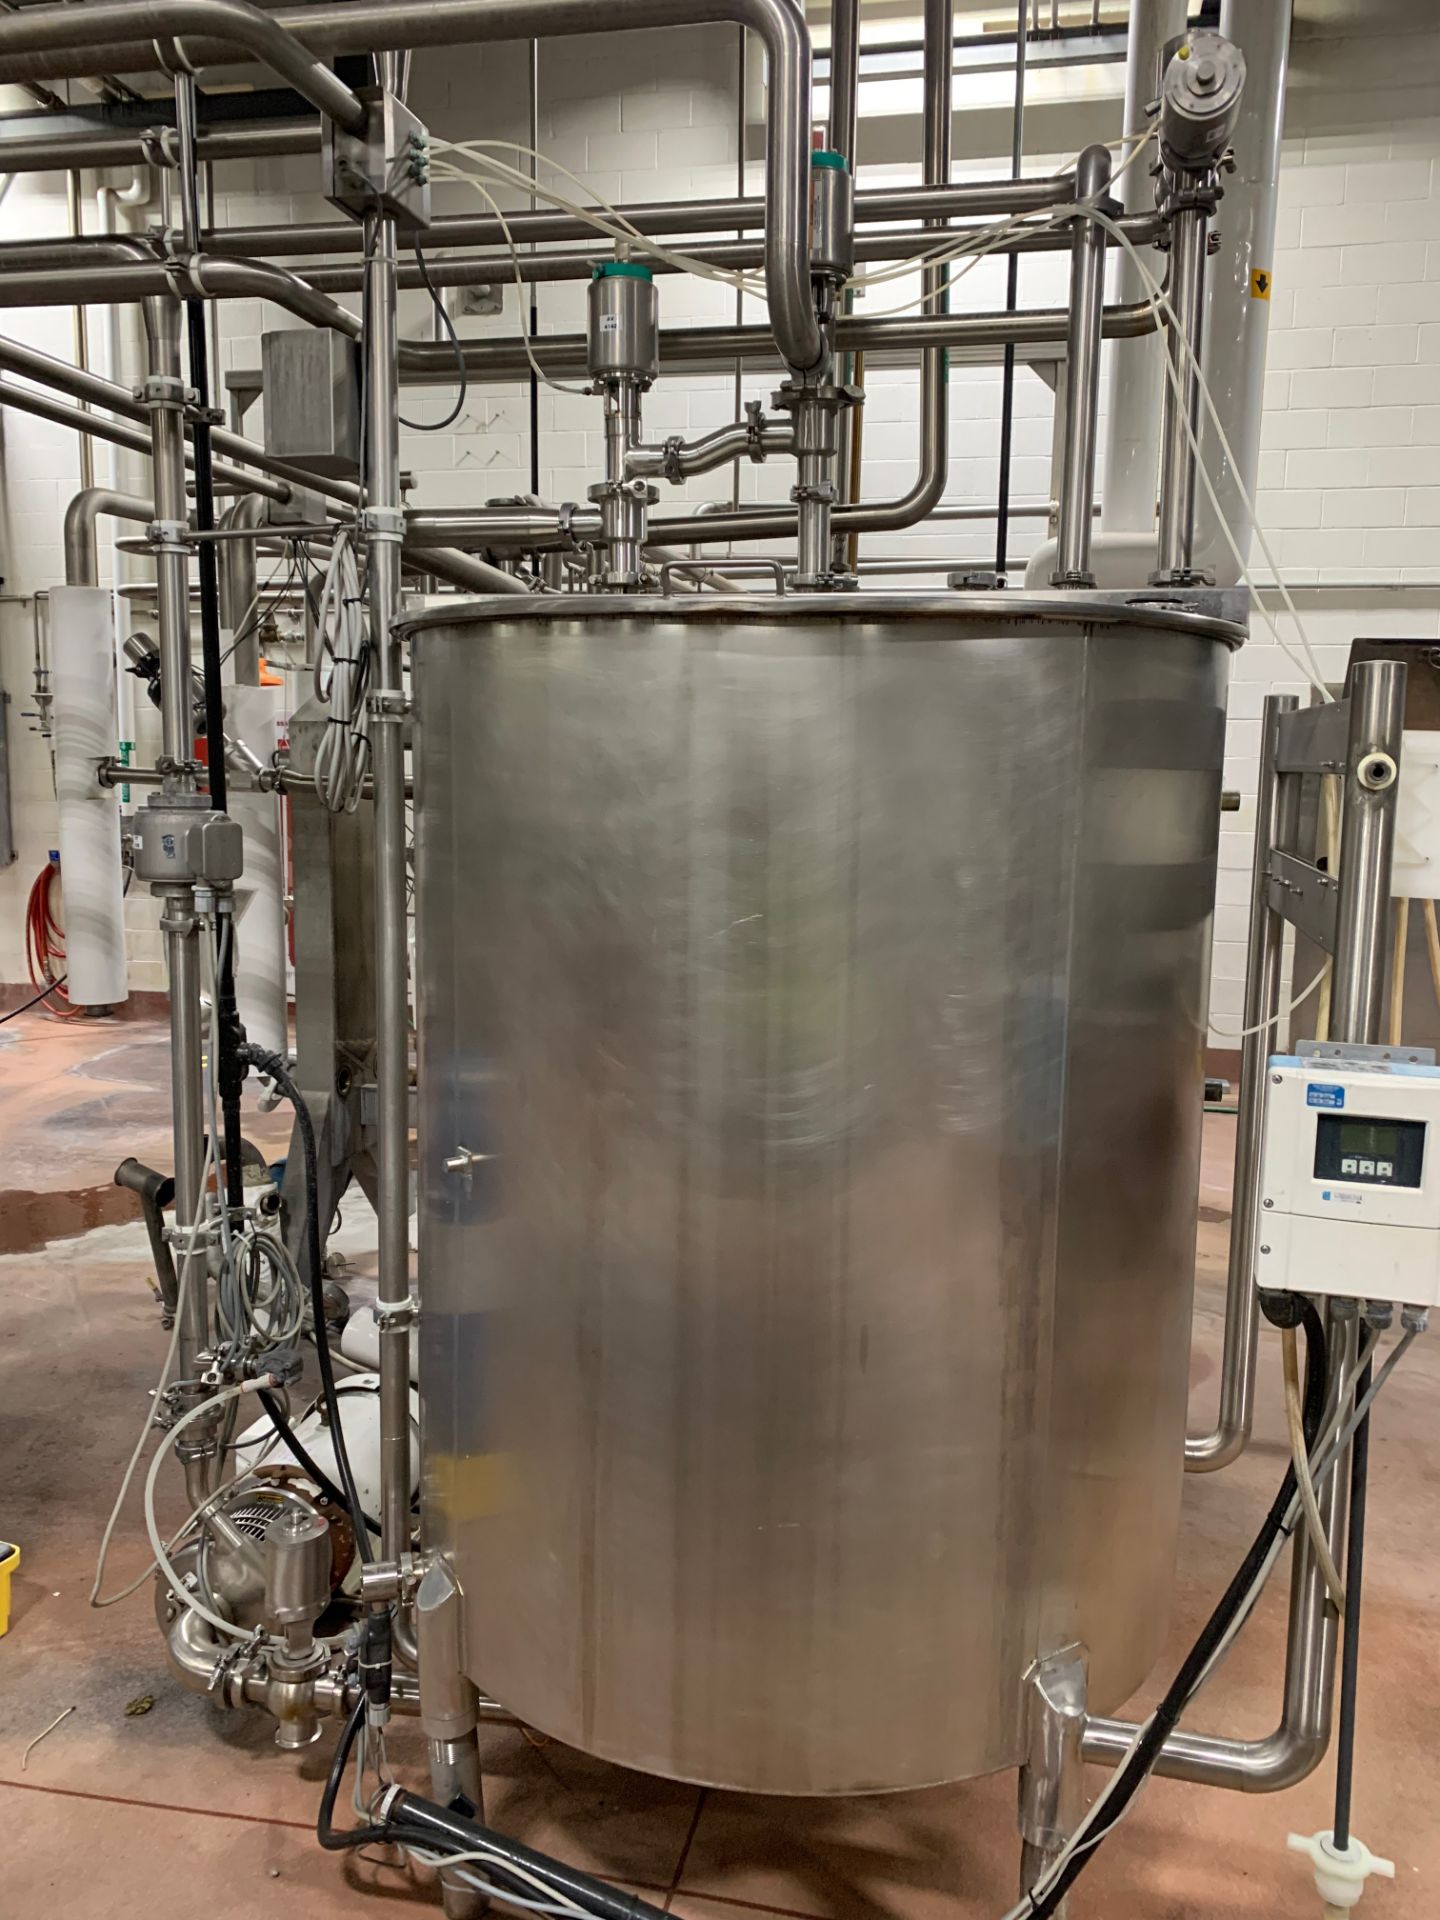 AGC Plate and Frame Pasteurization System - Image 8 of 28